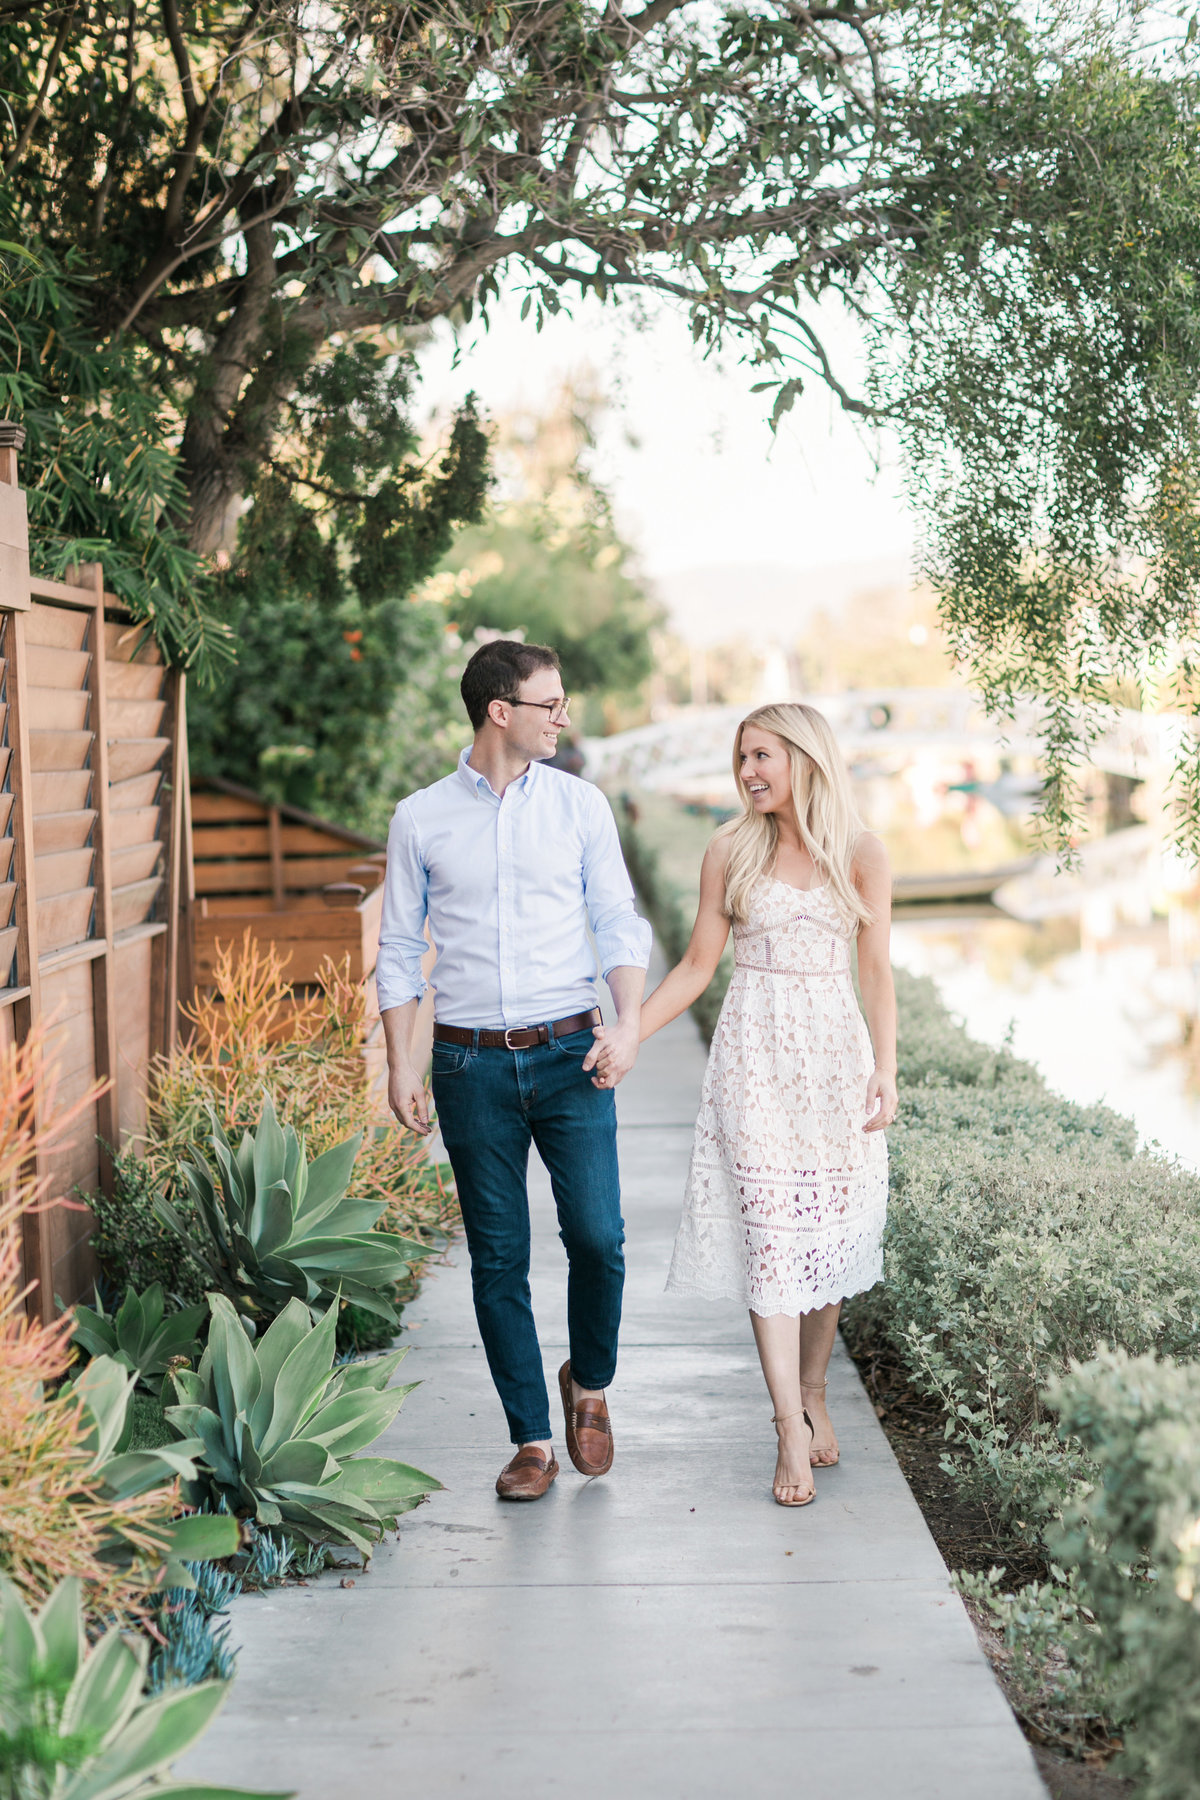 Venice Canal Beach Engagement Session_Valorie Darling Photography-6326